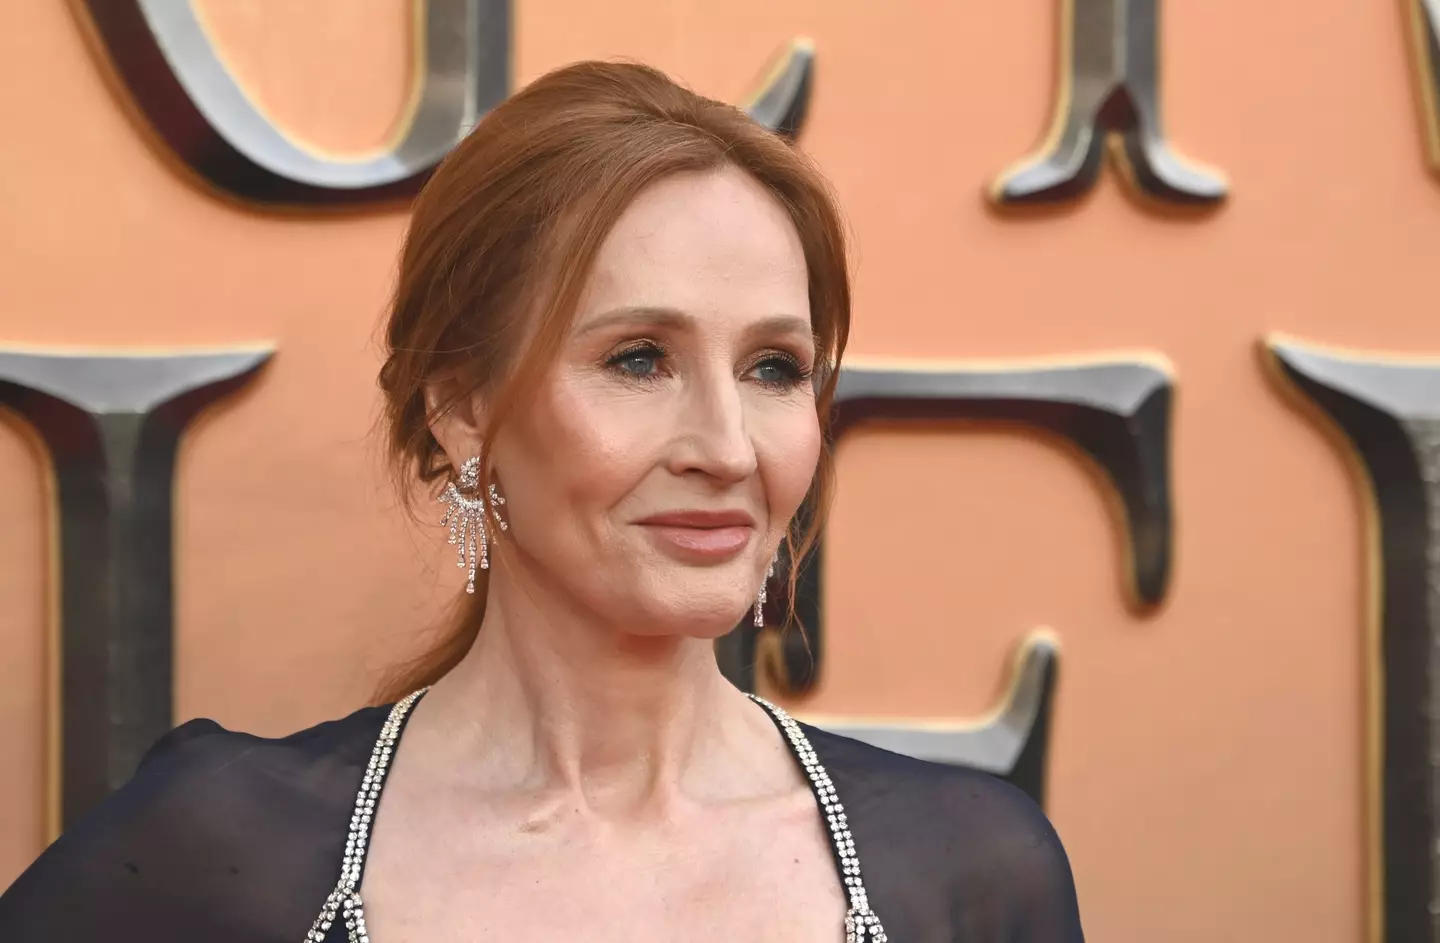 JK Rowling has been accused of transphobia (Stuart C. Wilson/Getty Images)